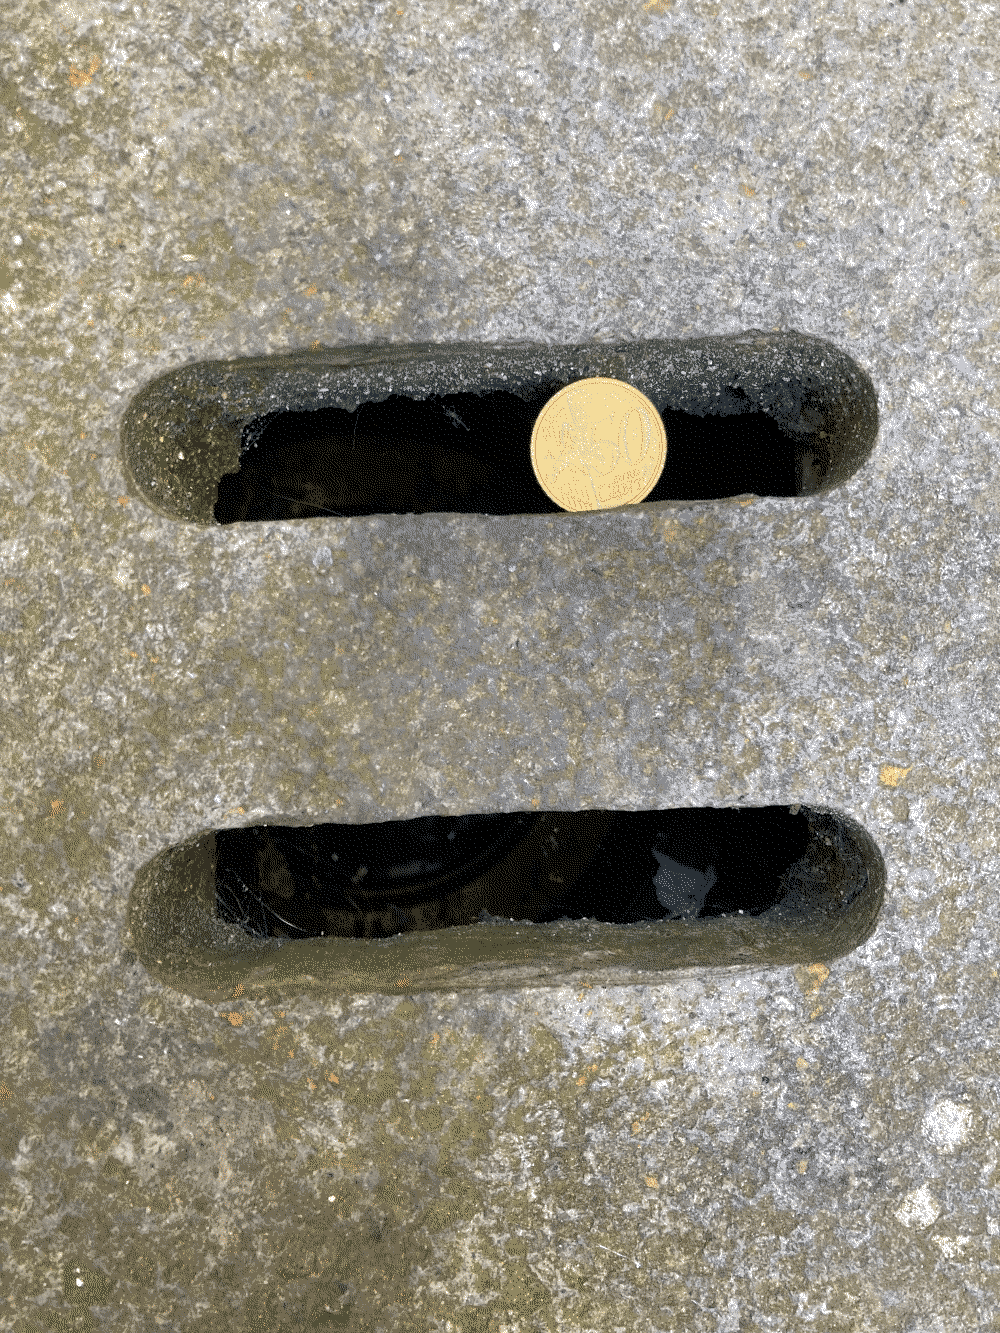 A coin sits stuck in a drain below the ground.